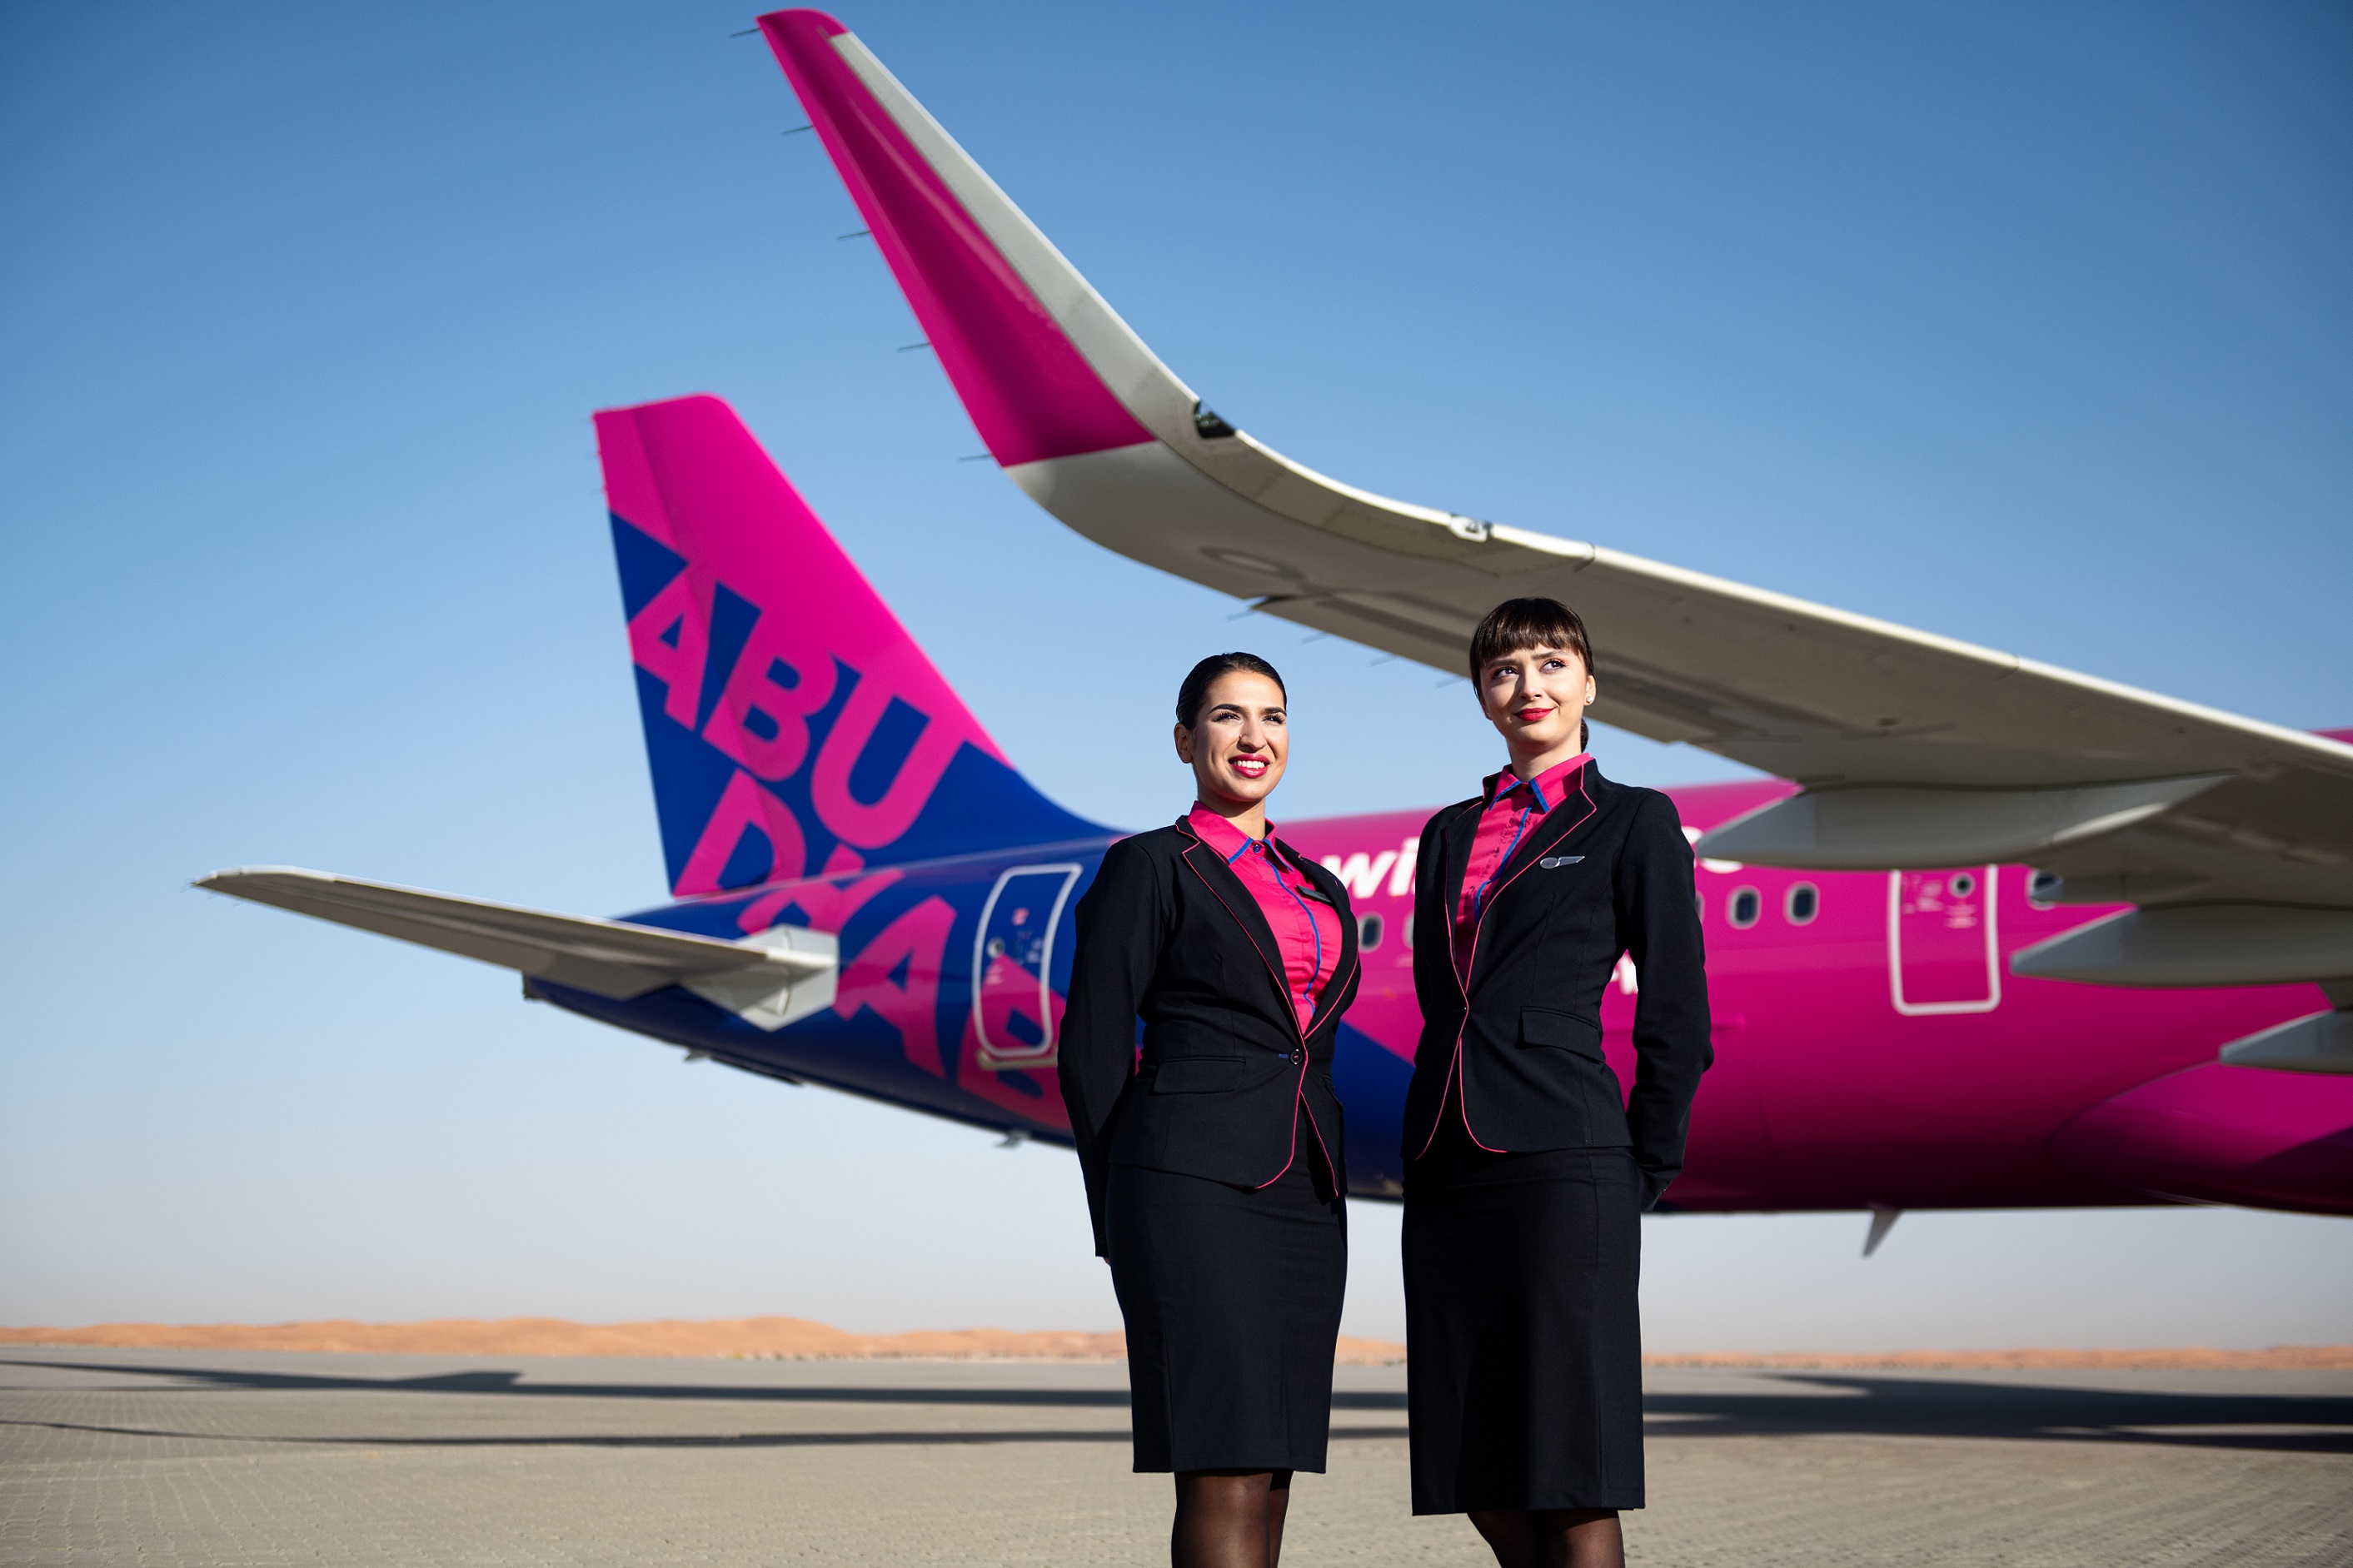 Wizz Air Abu Dhabi Confirms The Start Of Its Route To Aexandria, Egypt In February